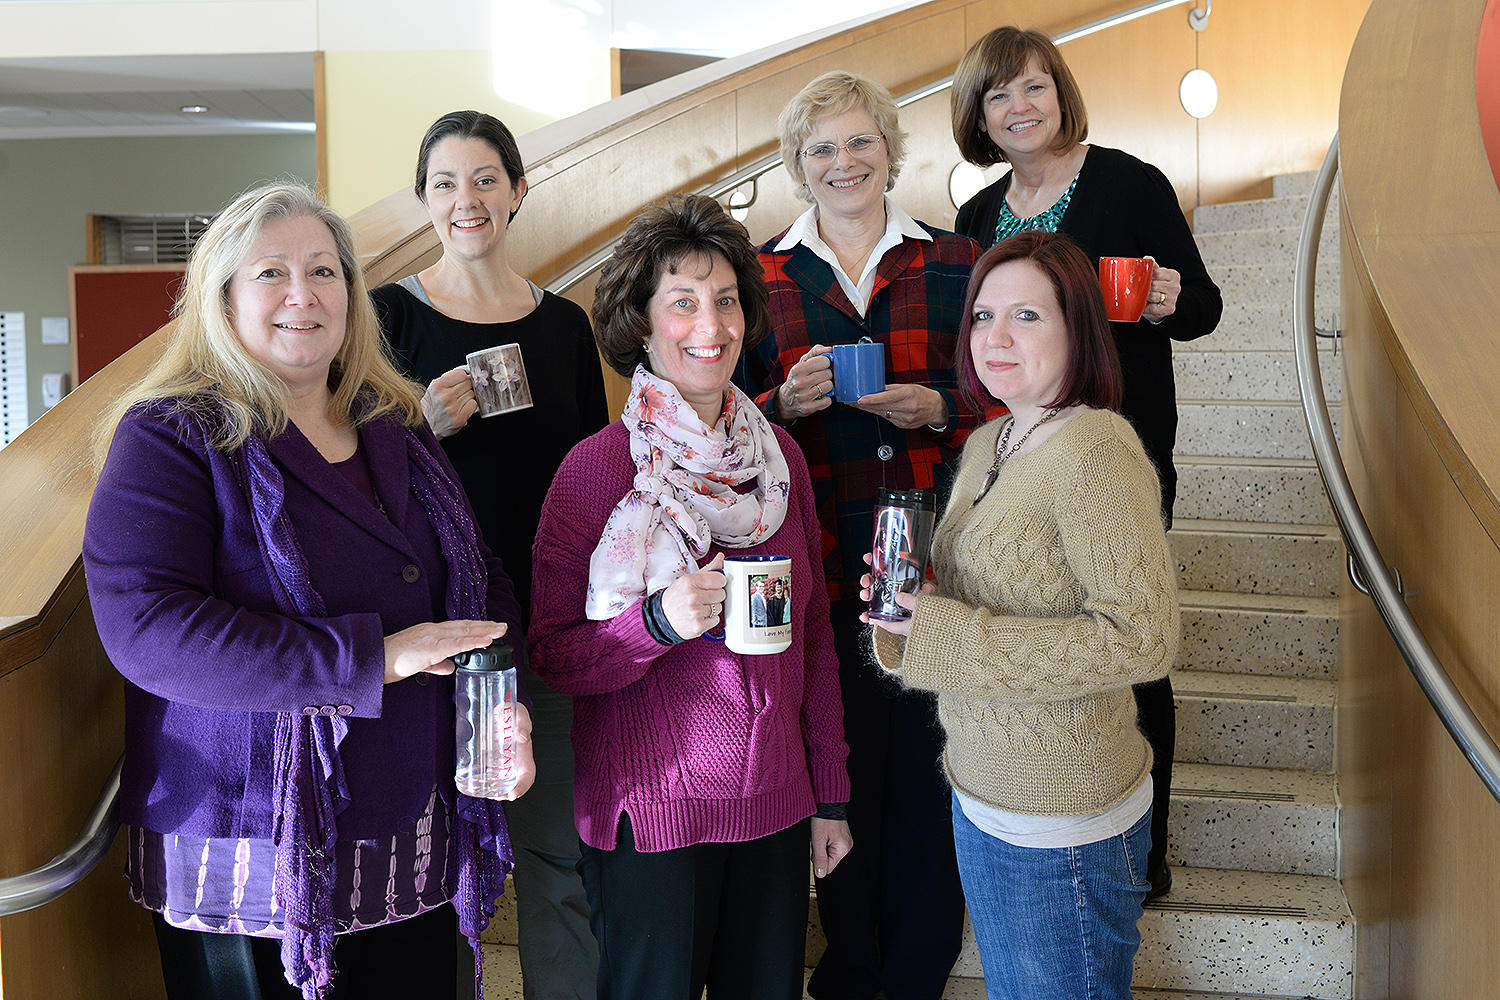 Current Green Team members, pictured here holding their reusable mugs, include, from left, Roslyn Carrier-Brault, Chemistry Department; Dawn Alger, Theater Department; Valerie Marinelli, College of the Environment; Liz Tinker, English Department; Anika Dane, Molecular Biology and Biochemistry Department; and Blanche Meslin, Biology Department.